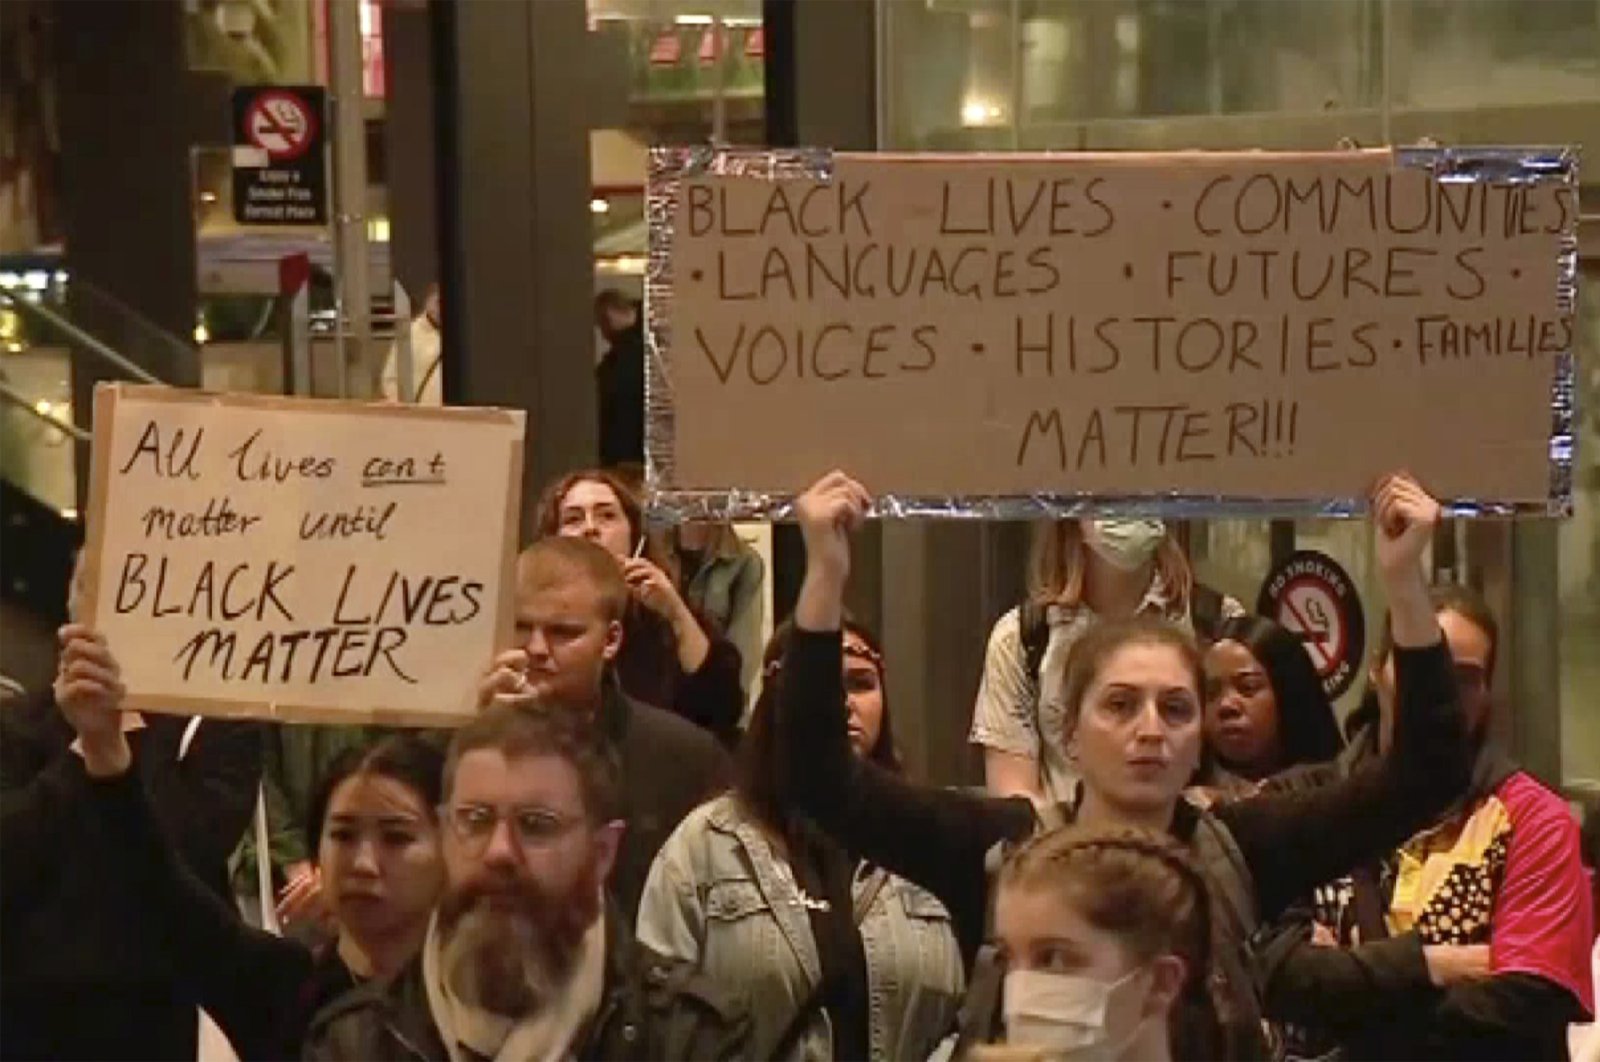 Protesters hold up placards reading "Black Lives Matter" during a peaceful rally in Perth, Australia, Monday, June 1, 2020. (Channel 10 via AP)